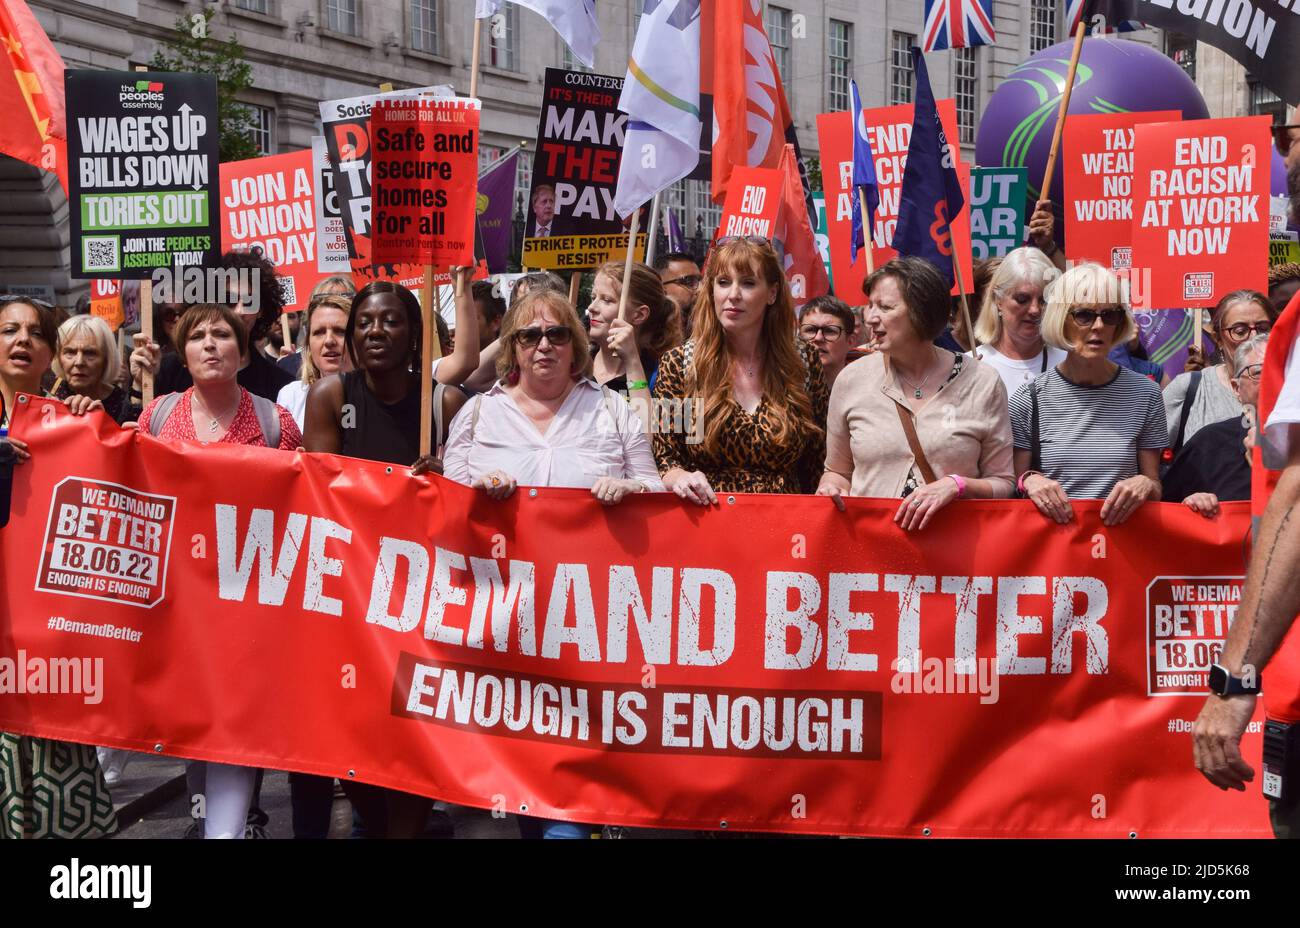 London, UK. 18th June 2022. Labour deputy leader Angela Rayner with trade union leaders Frances O'Grady, Christina McAnea, and Sue Ferns in Regent Street. Thousands of people and various trade unions and groups marched through central London in protest against the cost of living crisis, the Tory Government, the Rwanda refugee scheme and other issues. Credit: Vuk Valcic/Alamy Live News Stock Photo